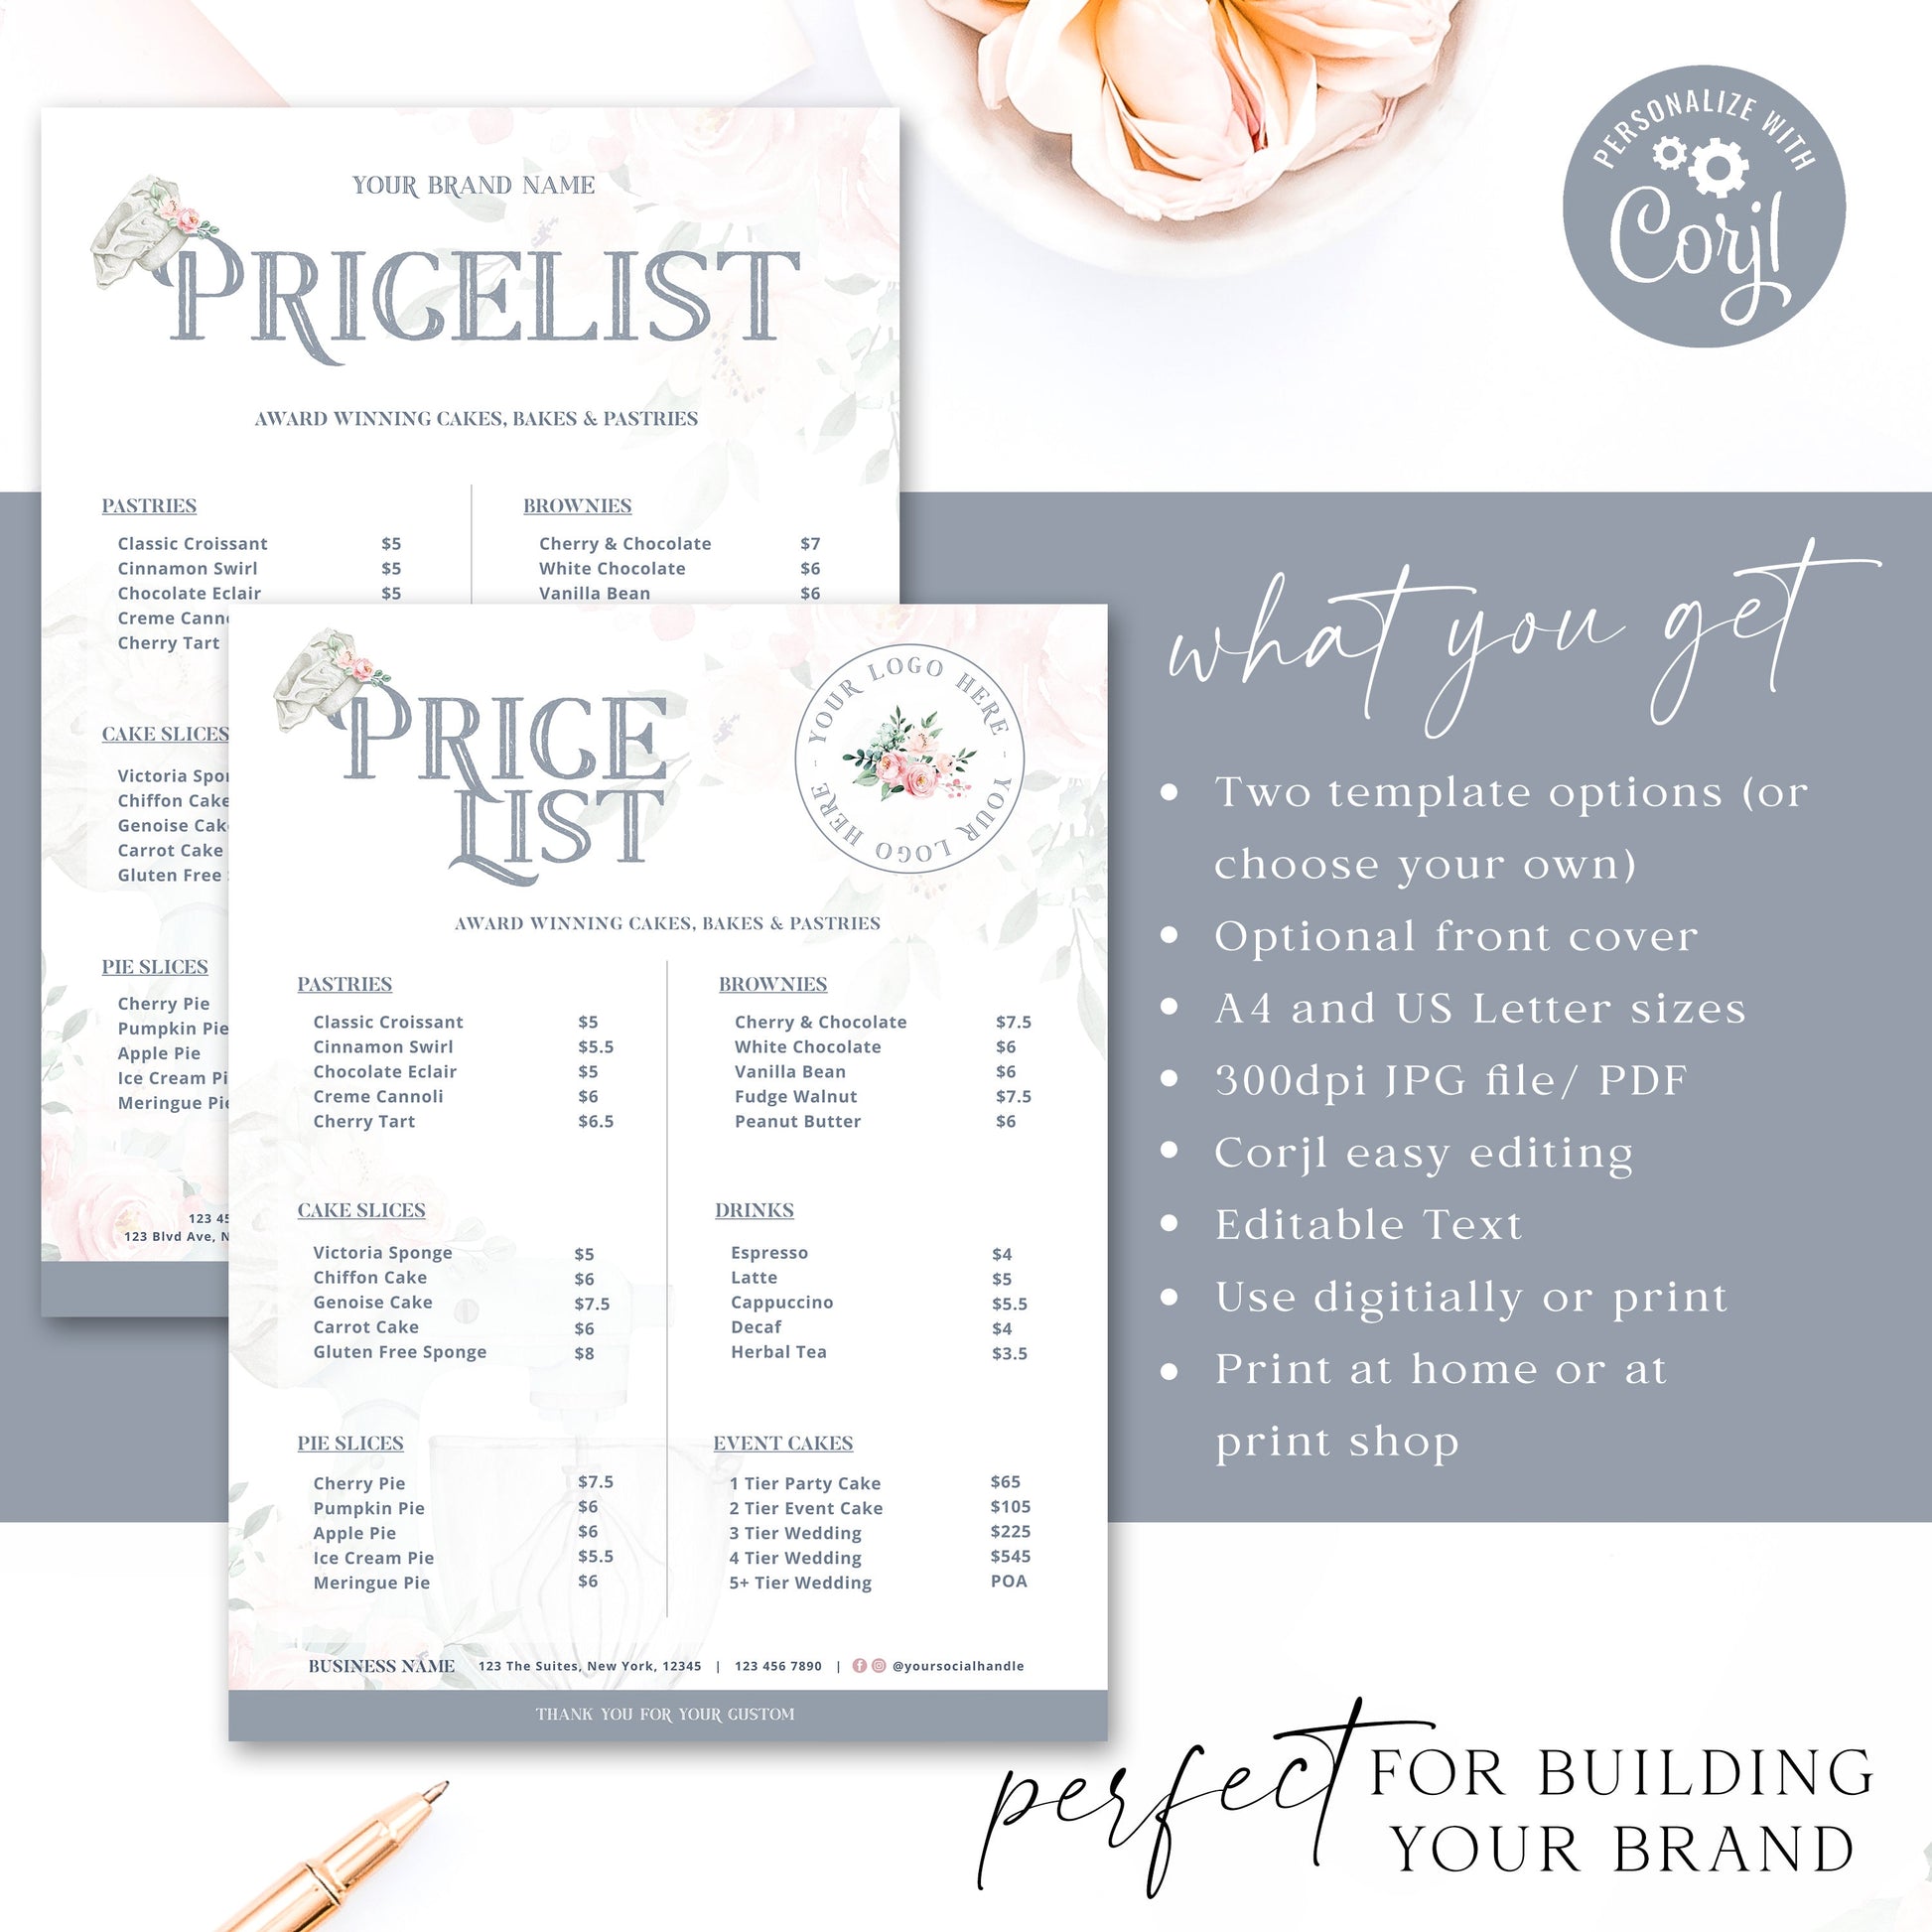 Bakery Price List Template, A4 & US Letter Editable Pricing Guide, Customizable Printable Price Guide, DIY Edit Cake Price Sheet JB-001